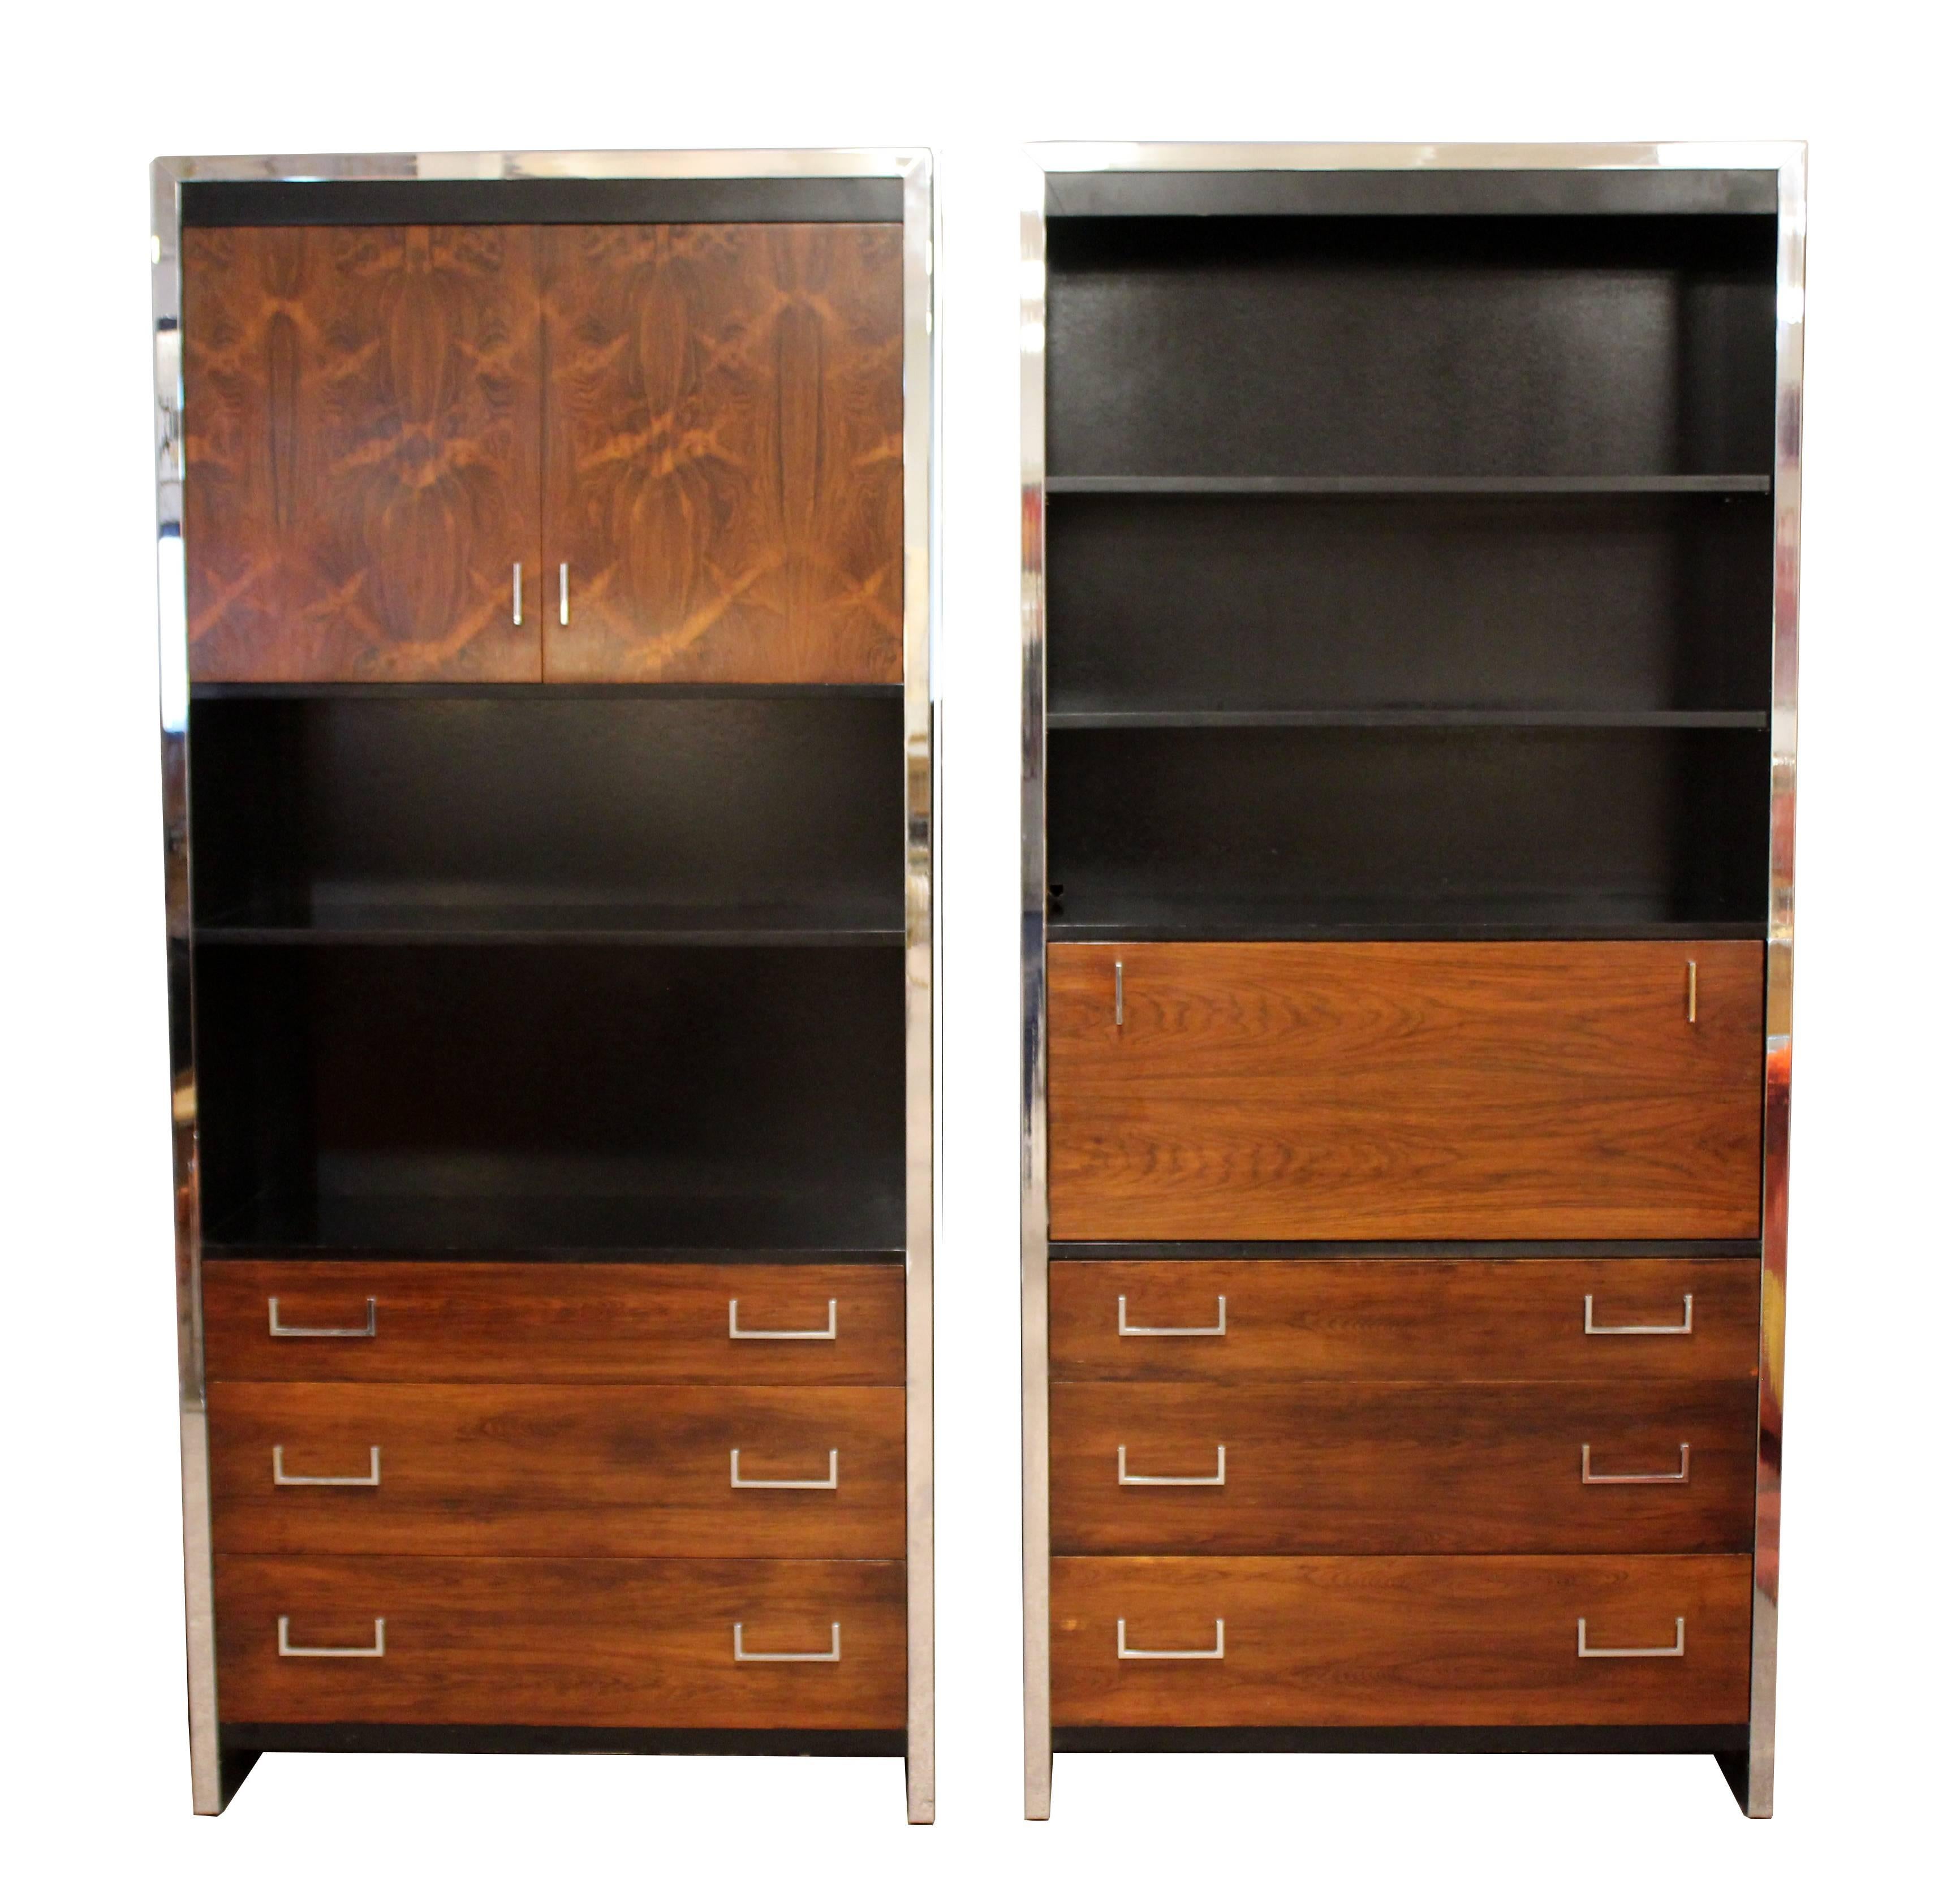 For your consideration is an incredible rosewood, chrome and black lacquer pair of cabinet shelving units and desk set, by Milo Baughman for John Stuart Inc, circa 1960s. The stunning campaign desk features two spacious rosewood drawers, with chrome